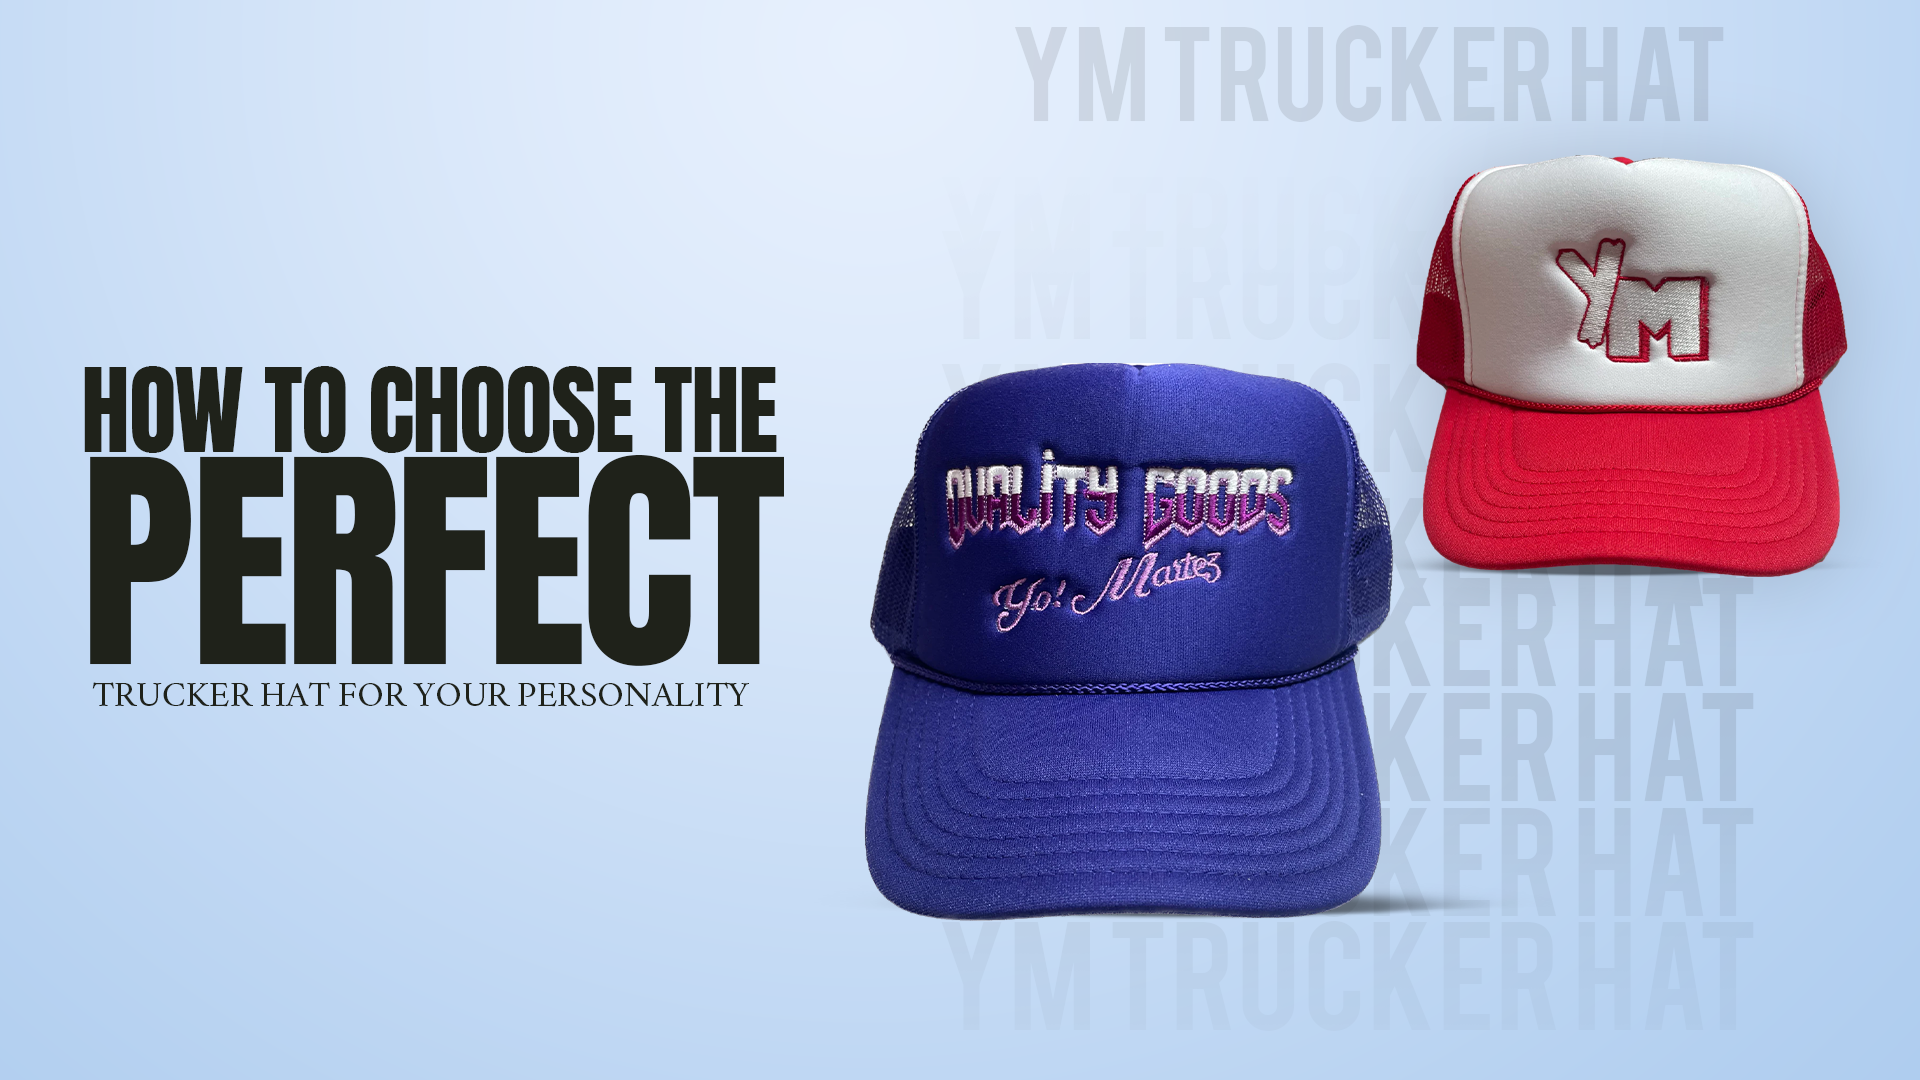 How to Choose the Perfect Trucker Hat for Your Personality